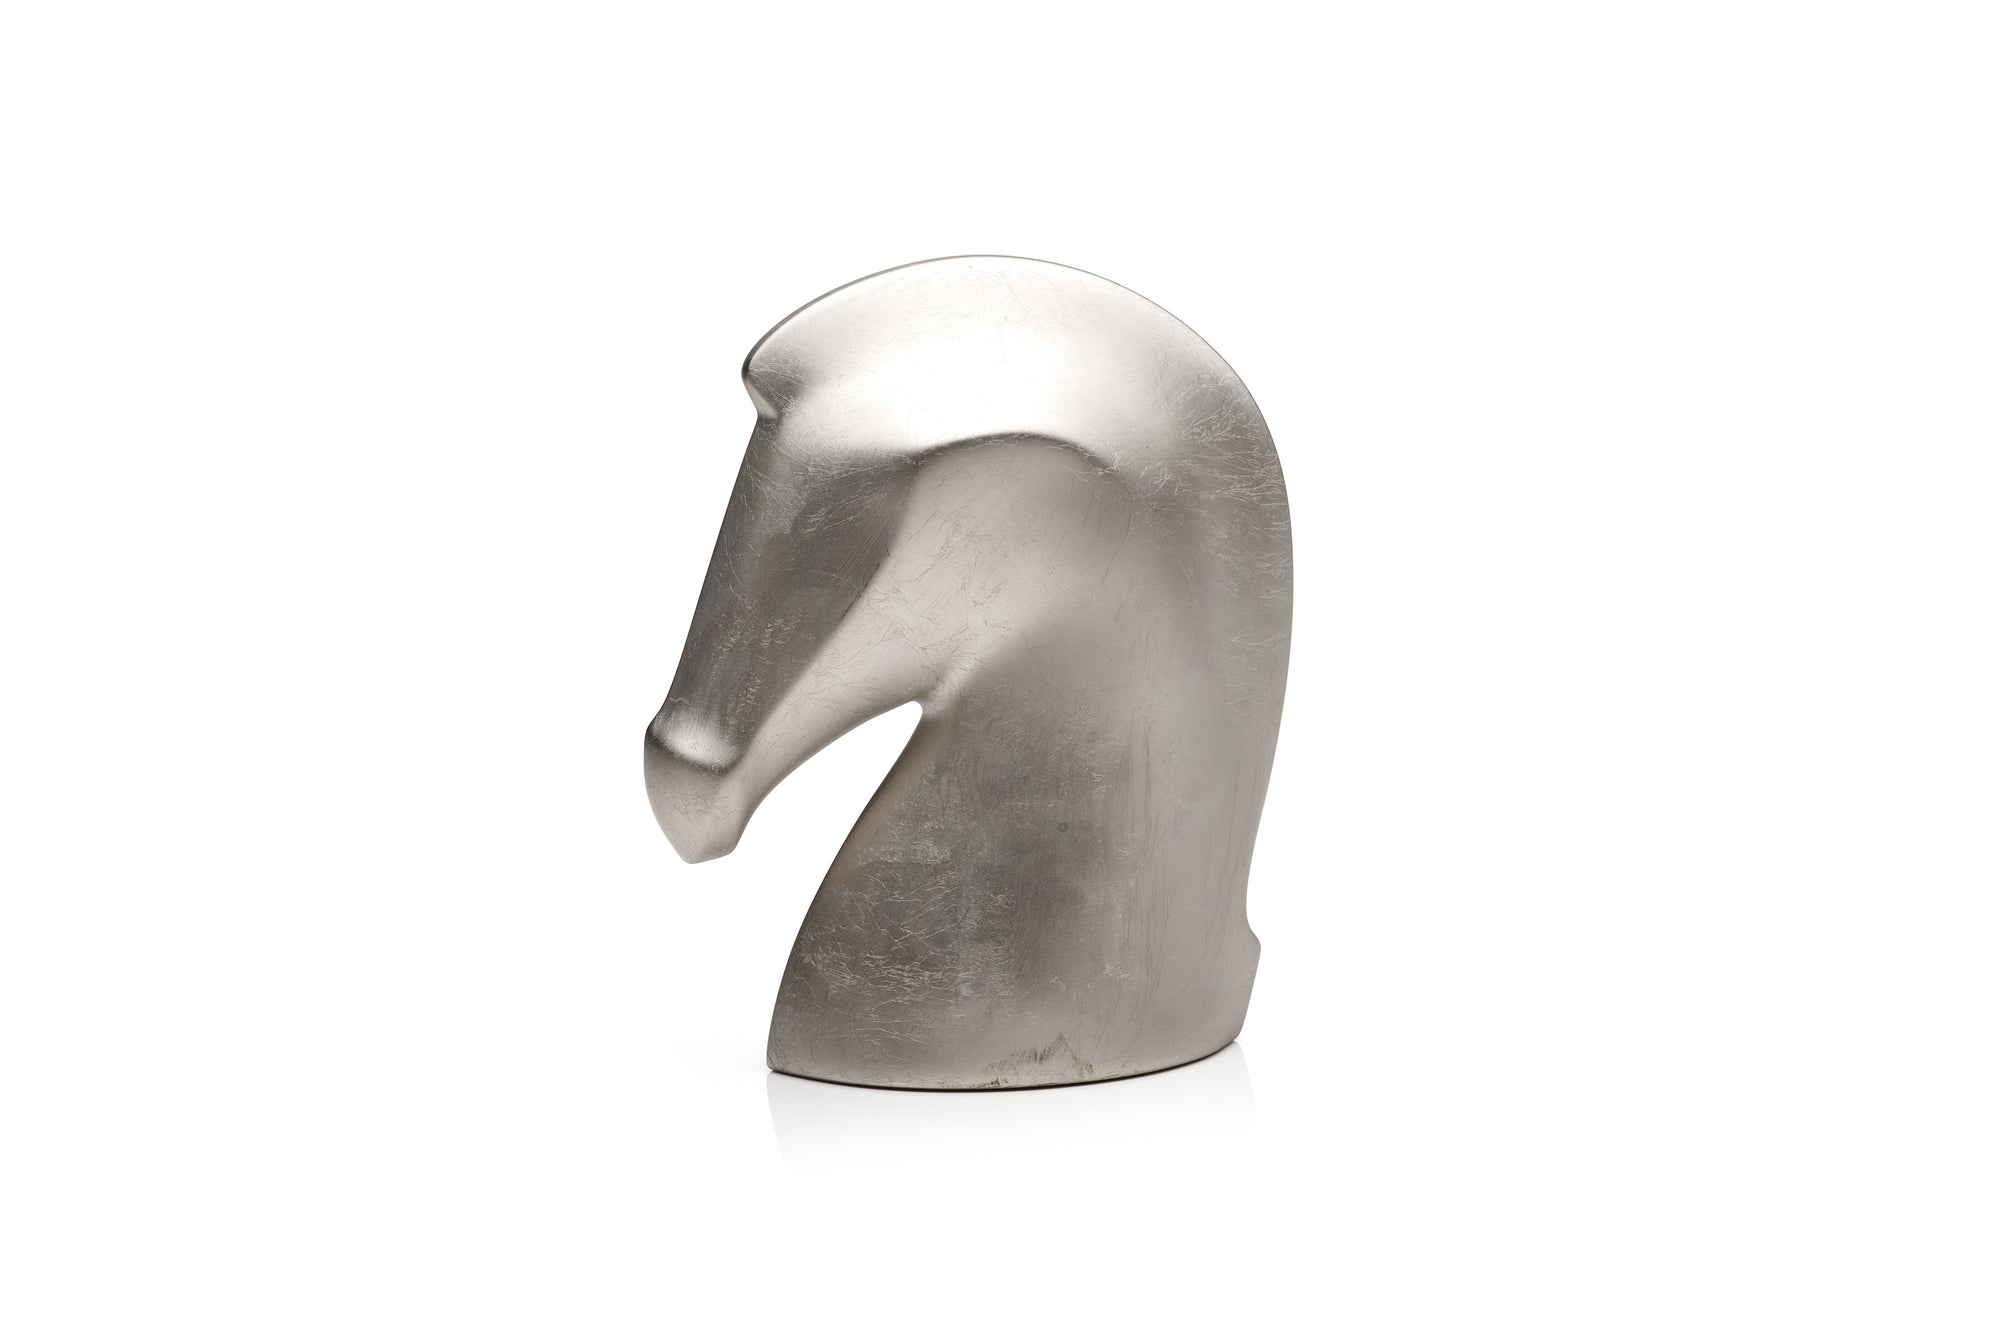 Hermes Horse Paperweight, Silver Foil